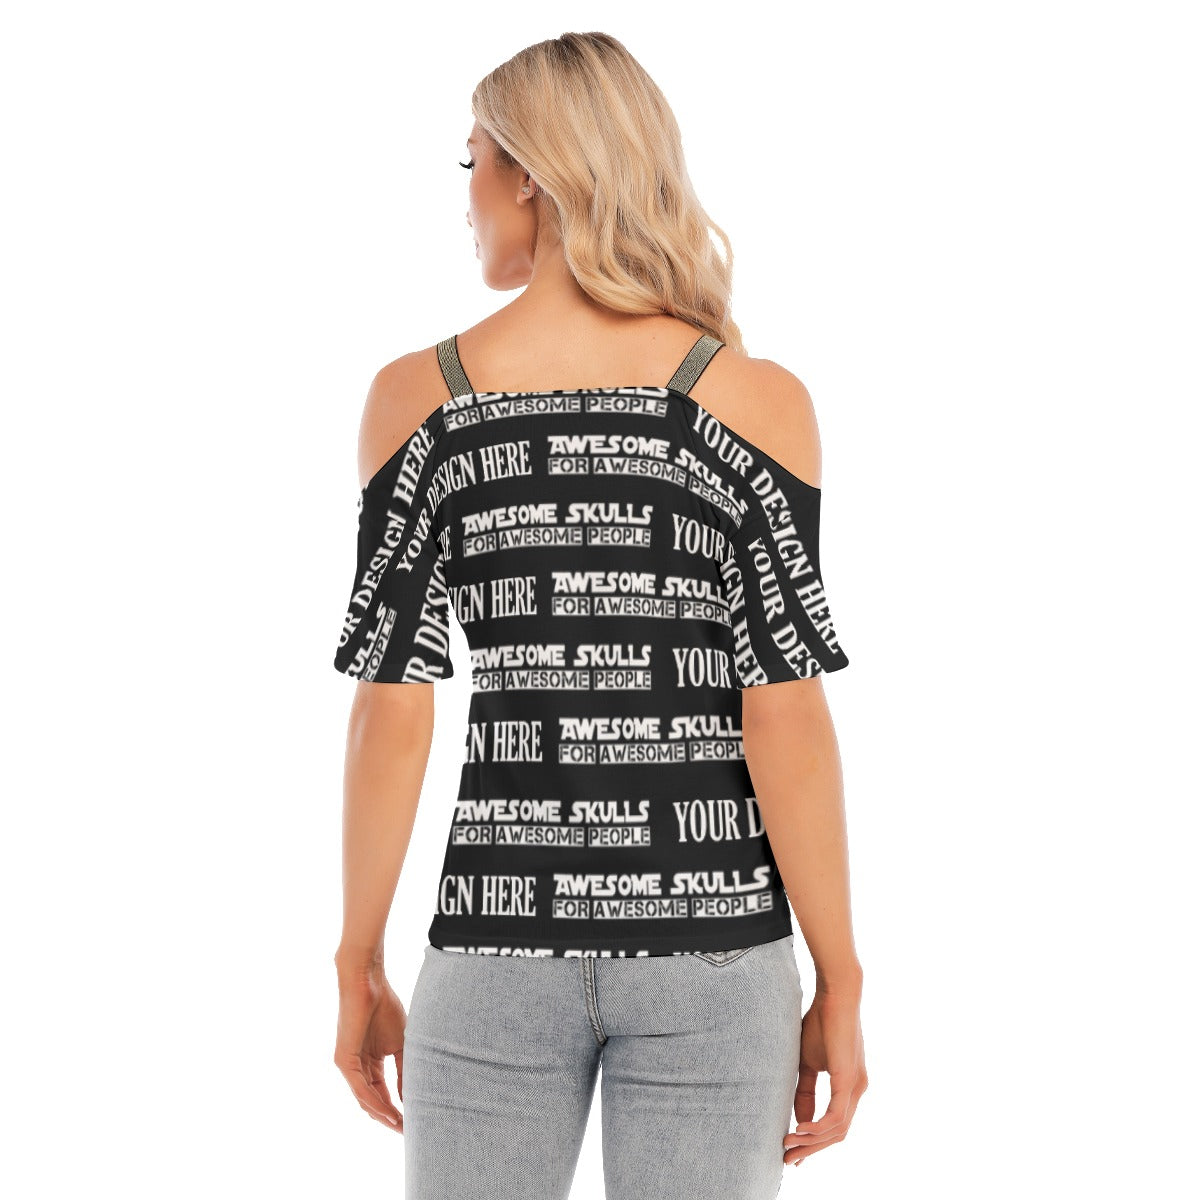 Custom print on demand pod Women's Top Cold Shoulder T-shirt With Golden Elastic Band On Neck